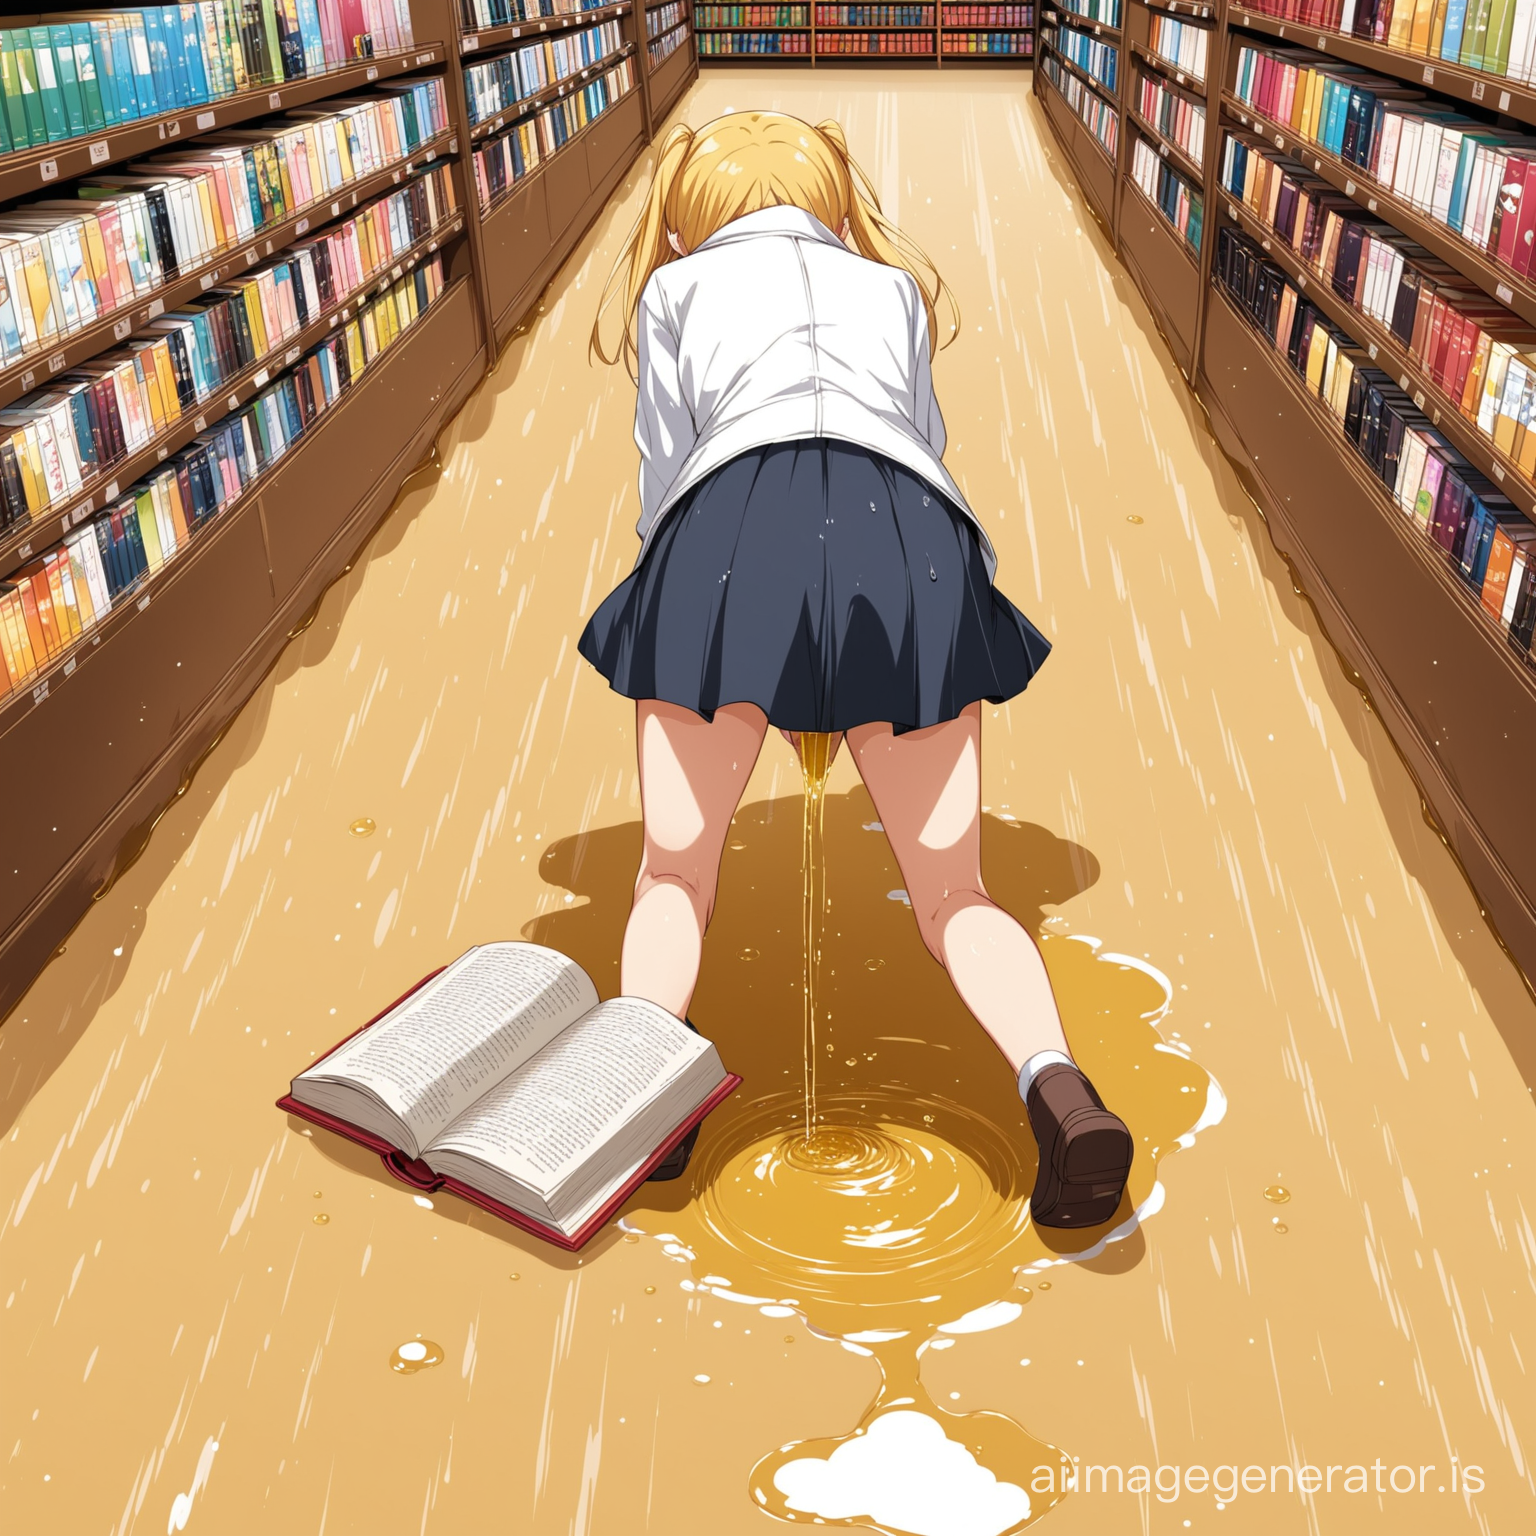 anime girl peeing on the floor of a book store with a puddle of pee on the floor